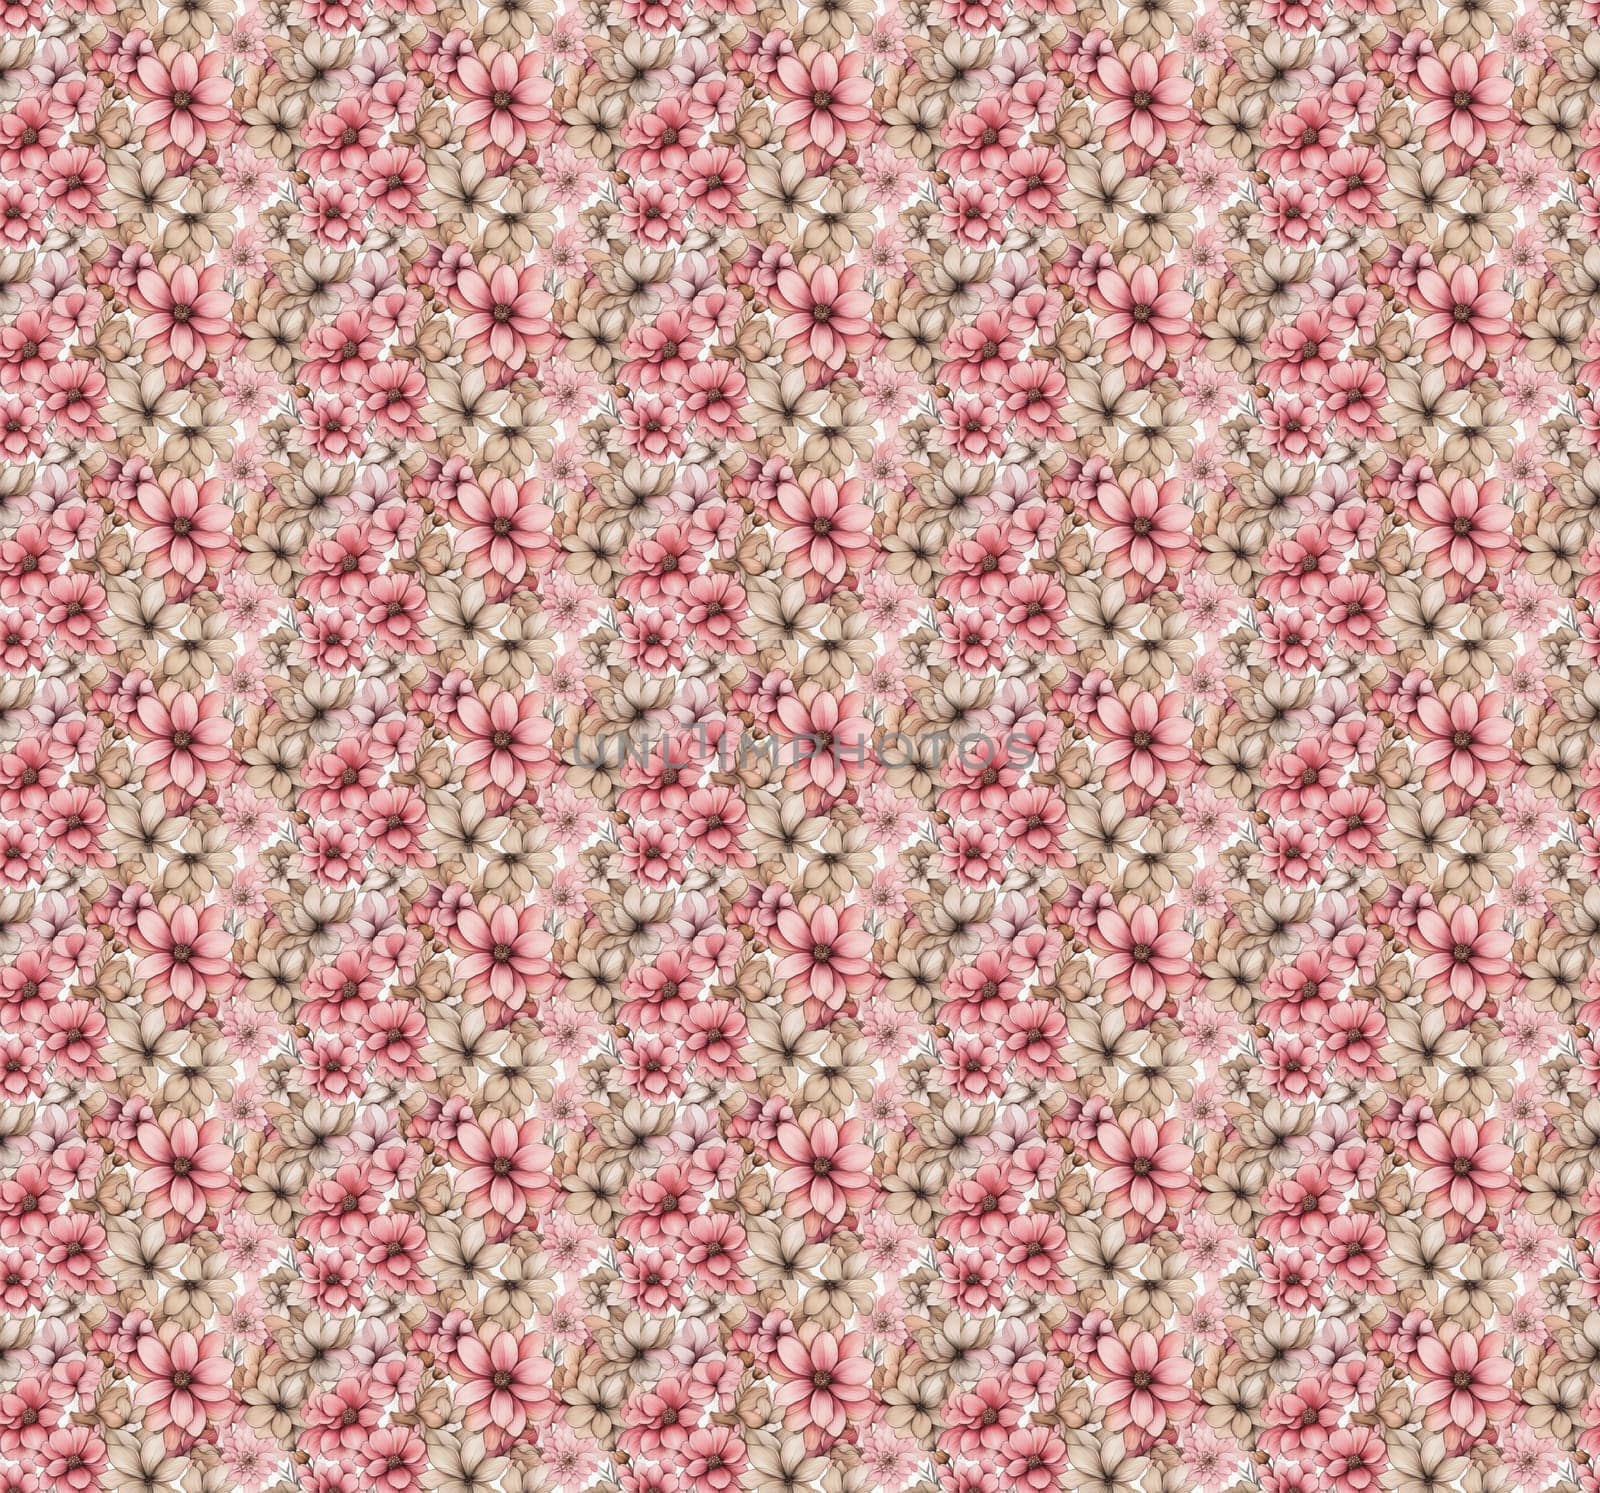 Abstract background of watercolor flowers, pink and beige colors